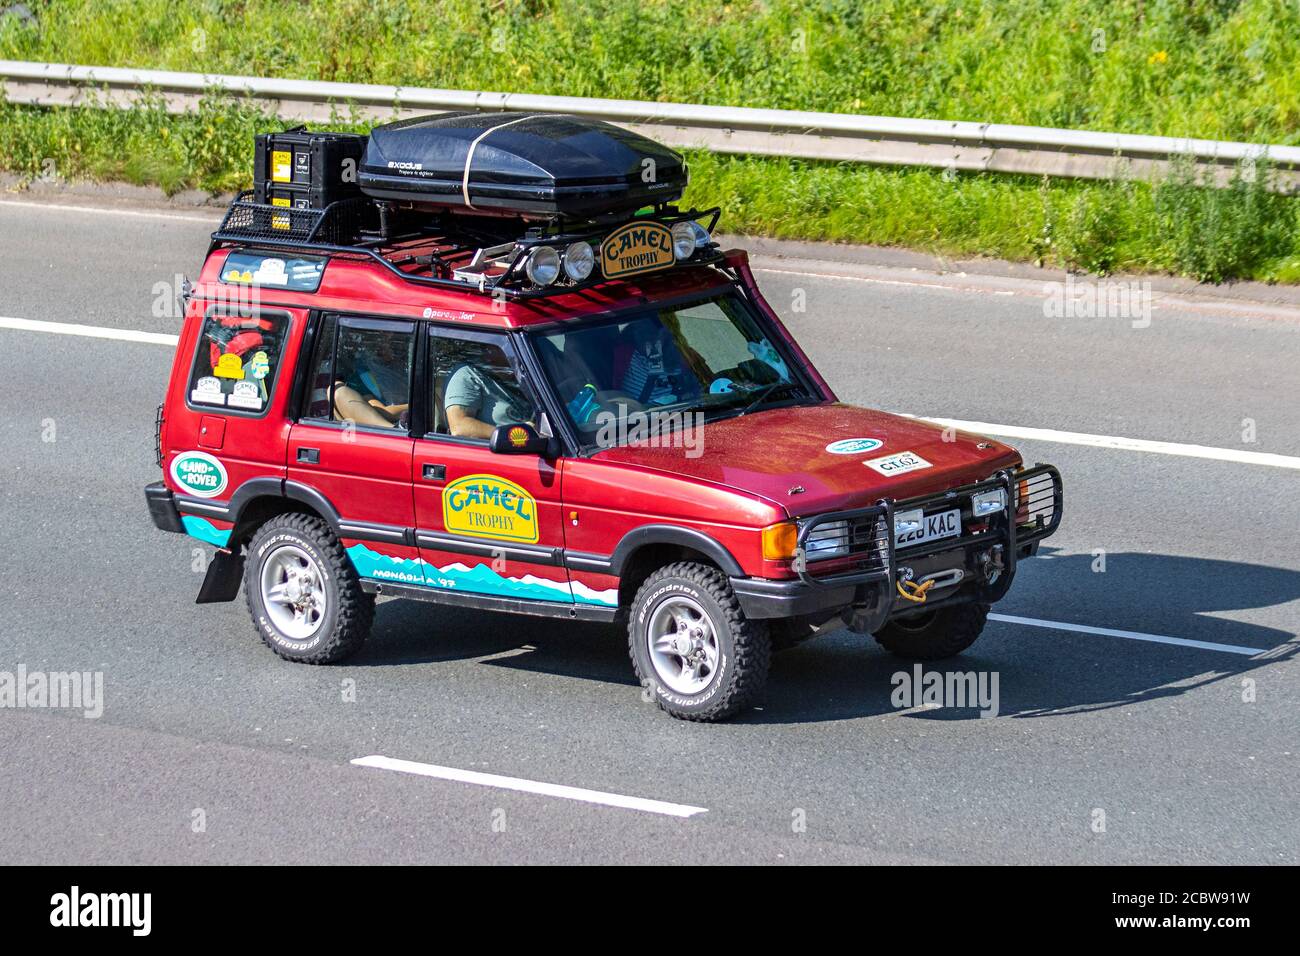 1997 90s nineties  KAC Red Camel Trophy Mongolia 97 Land Rover Vintage  expedition leisure, British off-road 4x4, rugged off-road all-terrain overland rally adventure vehicle, LandRover Discovery Turbo Diesel UK Stock Photo